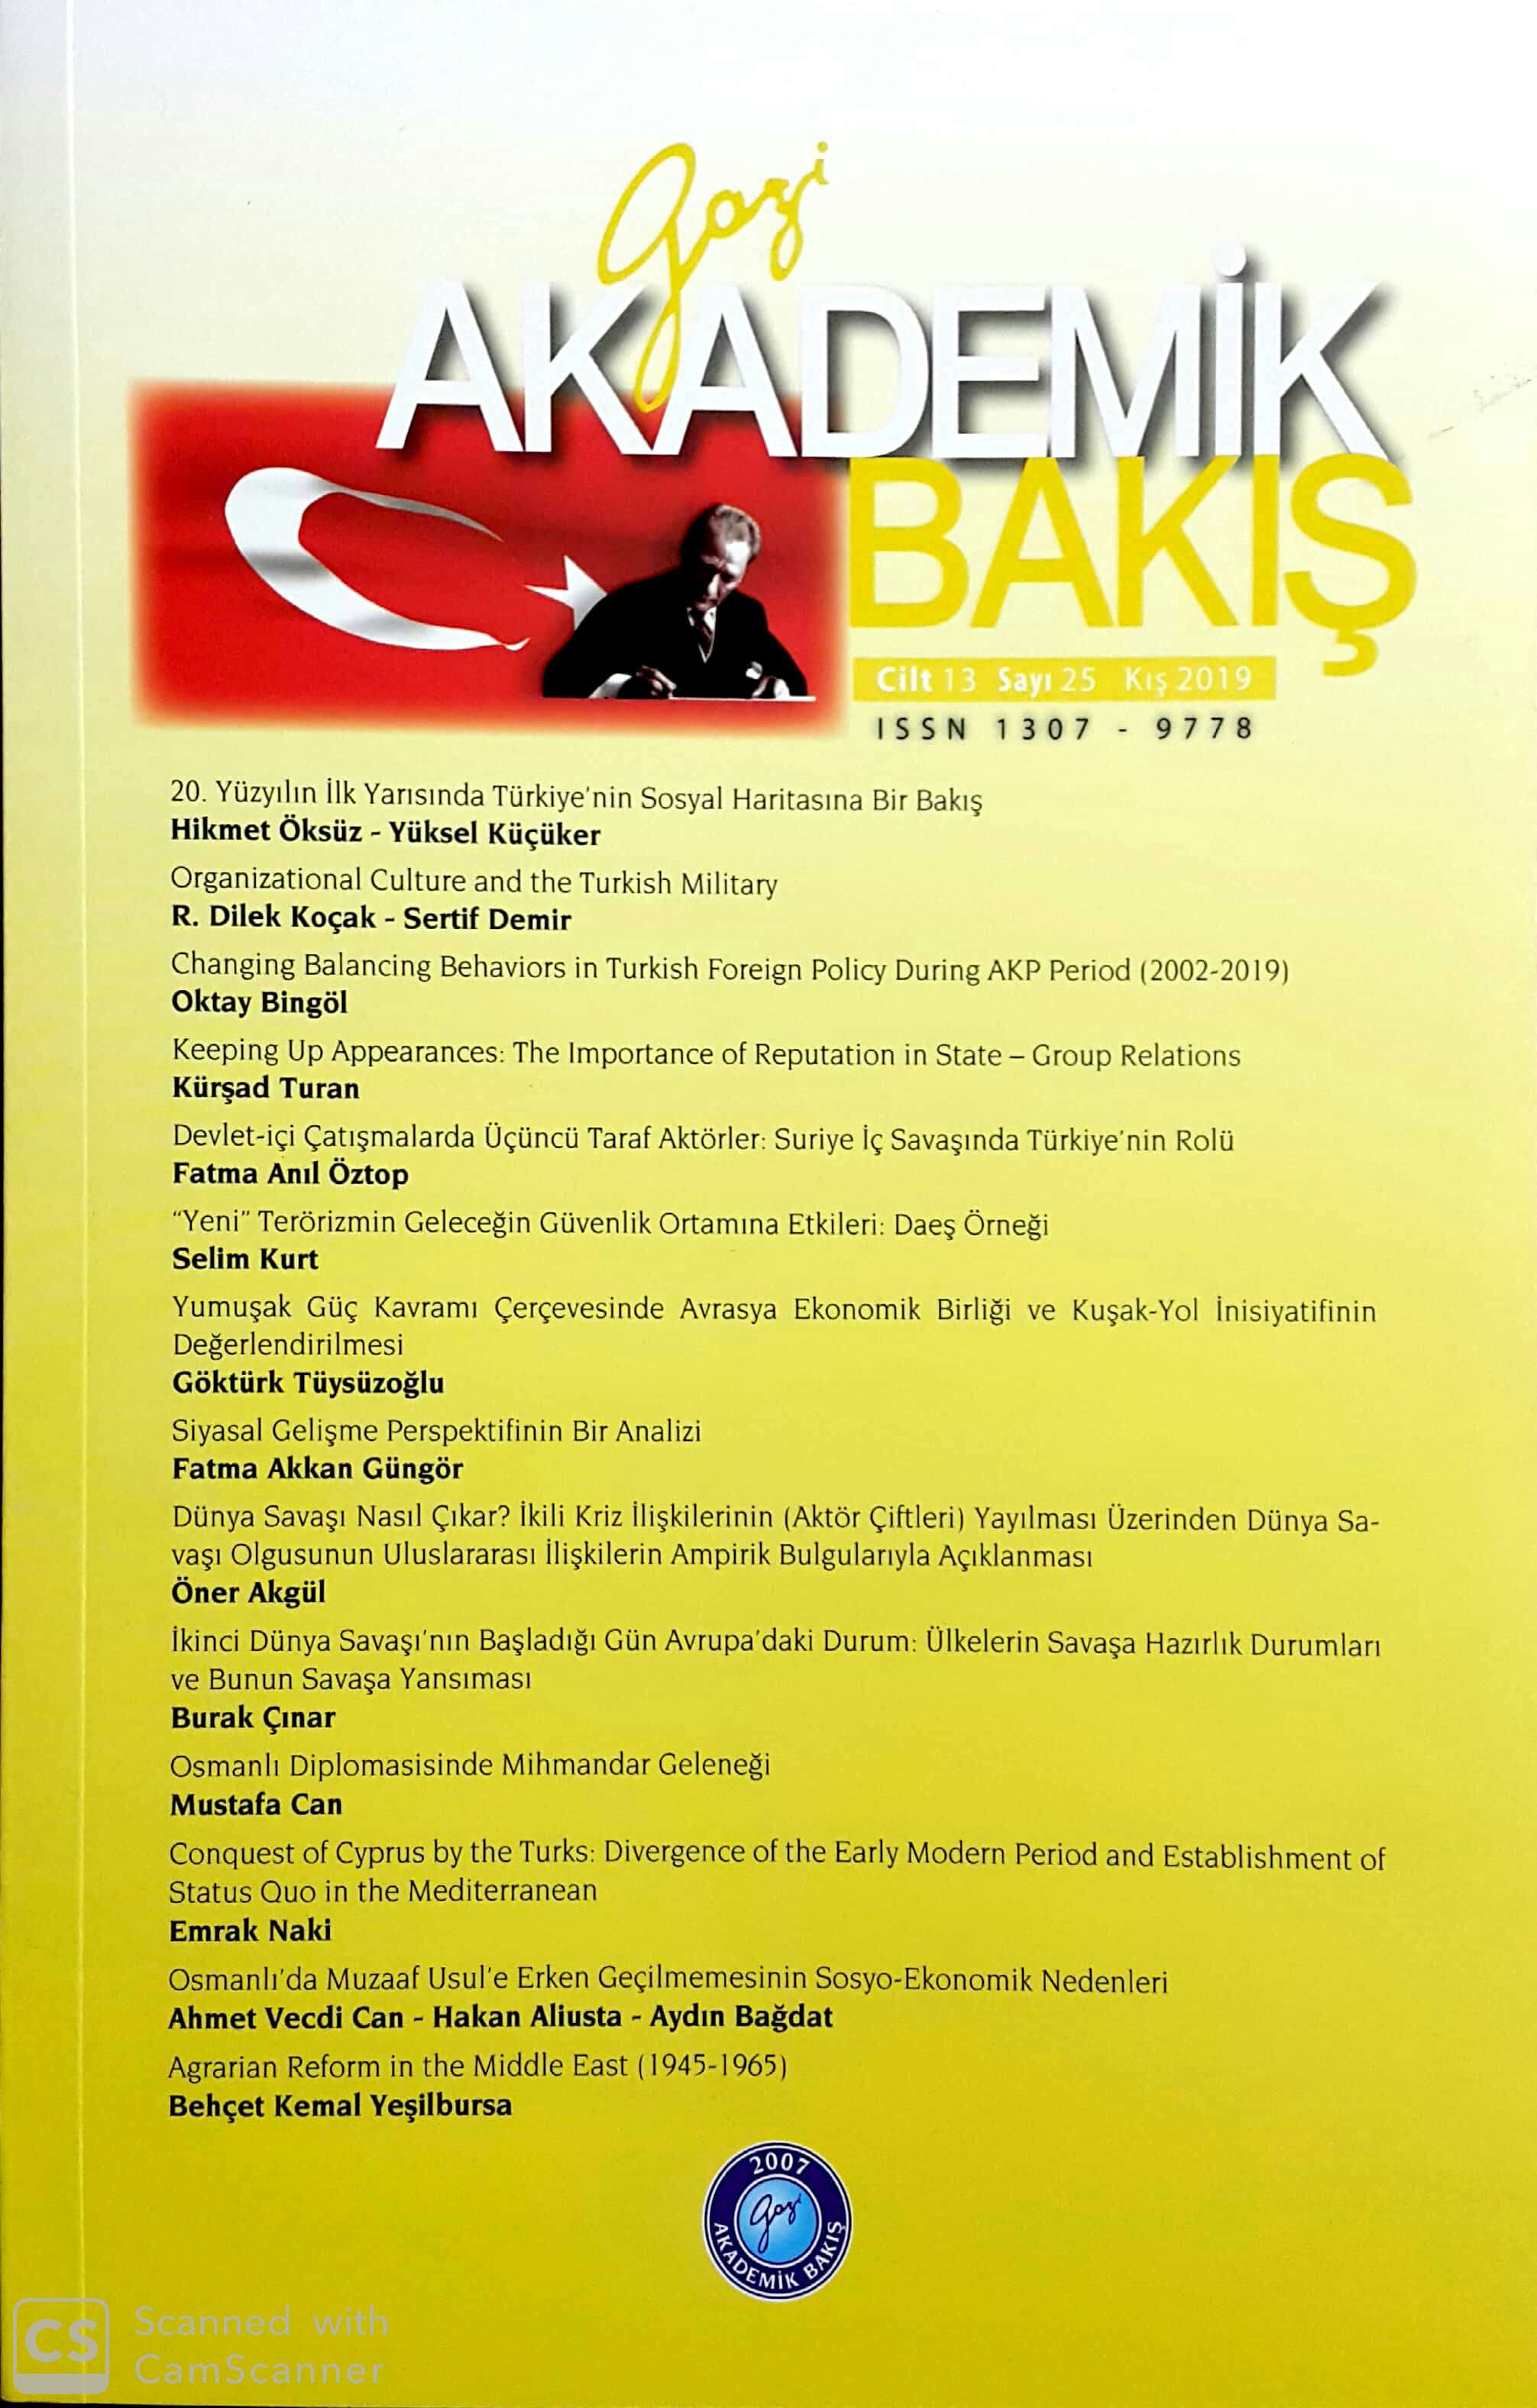 Changing Balancing Behaviors in Turkish Foreign Policy during AKP Period (2002-2019)